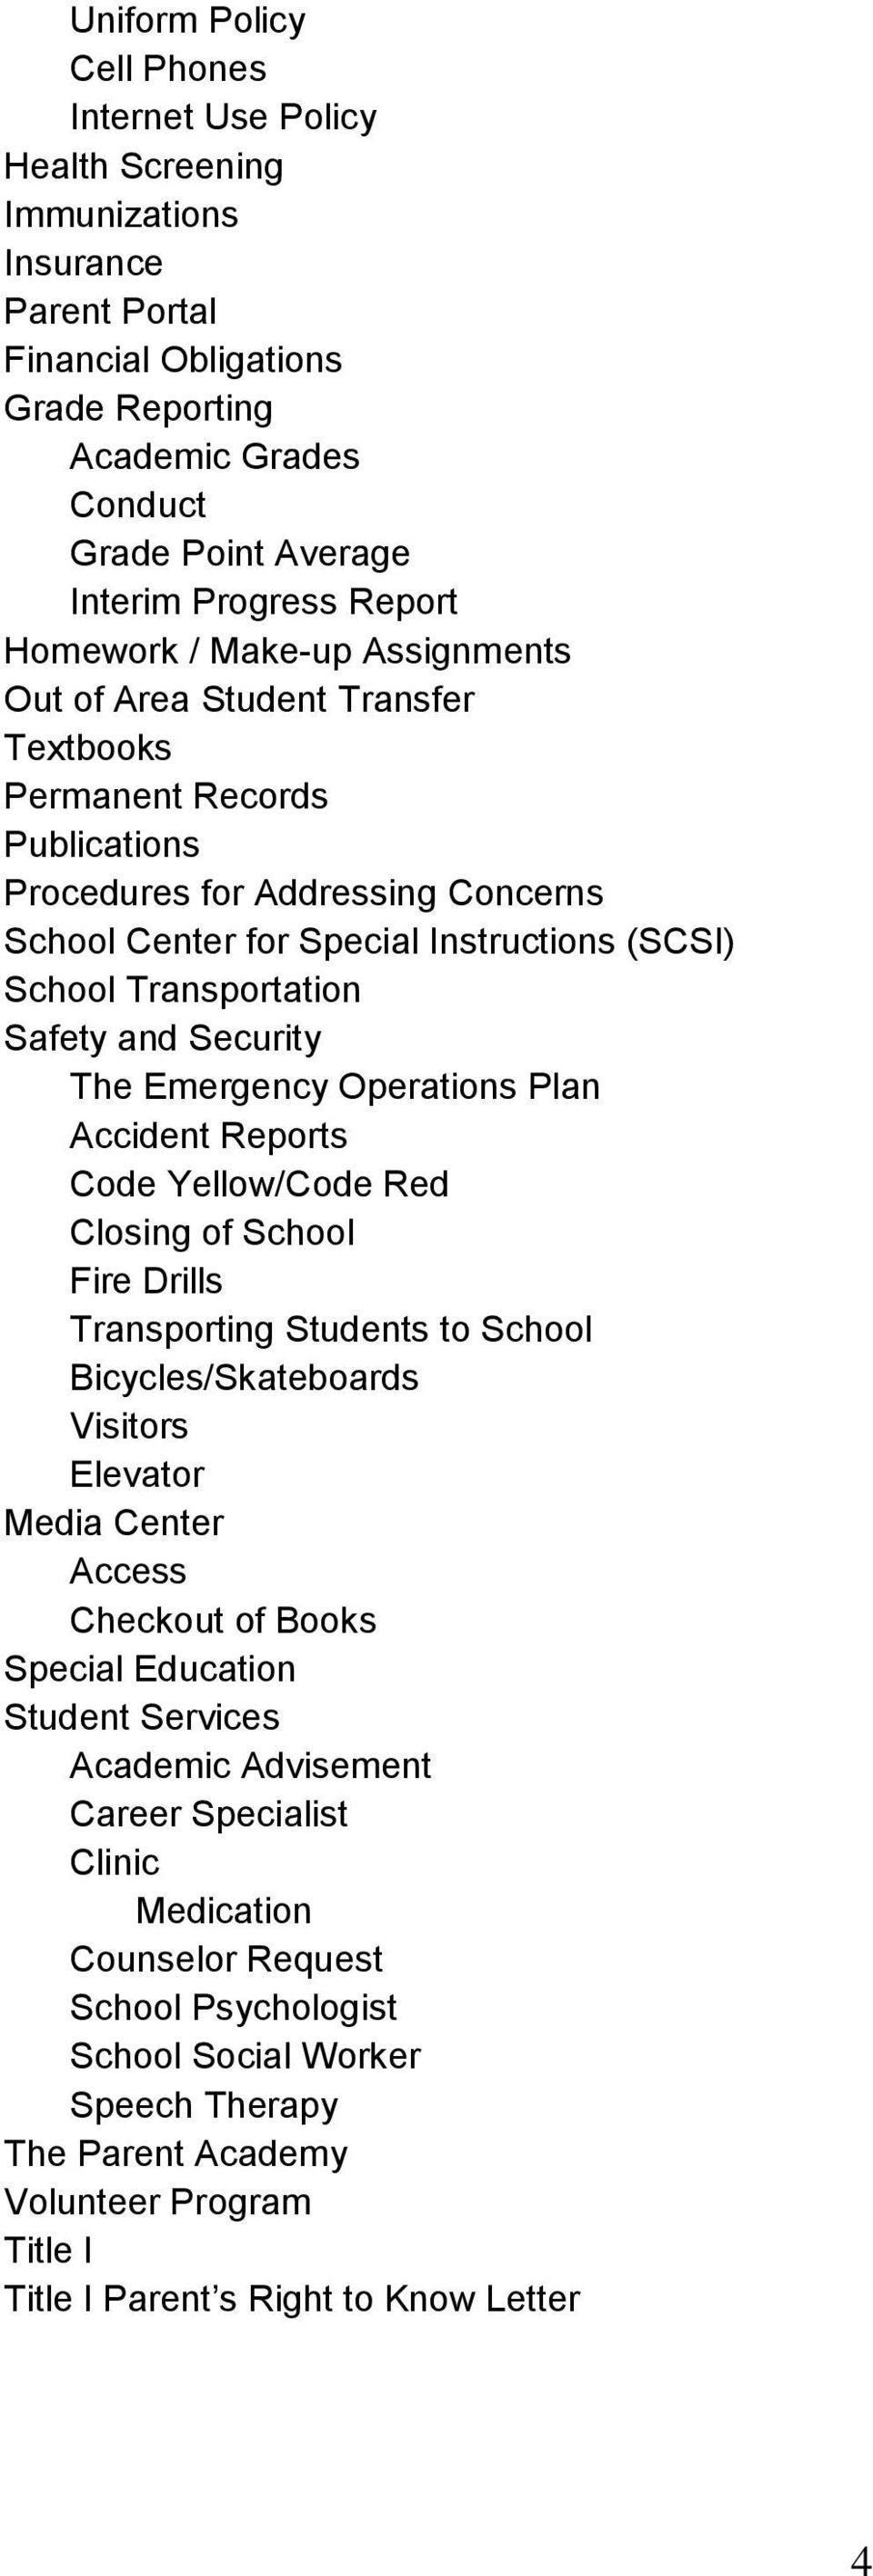 School Transportation Safety and Security The Emergency Operations Plan Accident Reports Code Yellow/Code Red Closing of School Fire Drills Transporting Students to School Bicycles/Skateboards